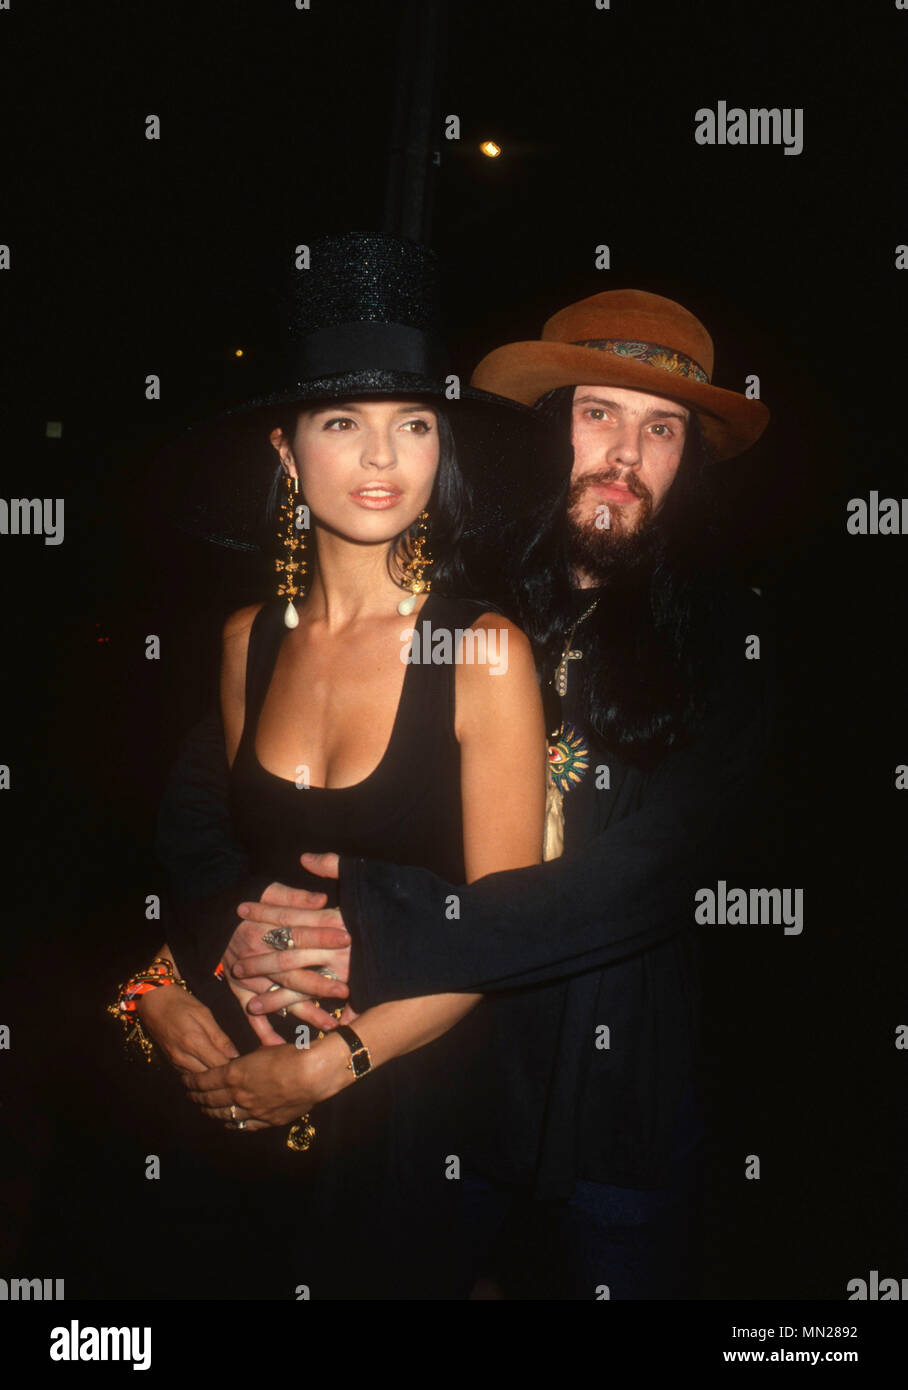 LOS ANGELES, CA - JULY 26: (L-R) Heatherlyn Campbell and musician/singer Ian Astbury of The Cult attend Was (Not Was) Band's concert at Club Mayan on July 26, 1990 in Los Angeles, California. Photo by Barry King/Alamy Stock Photo Stock Photo